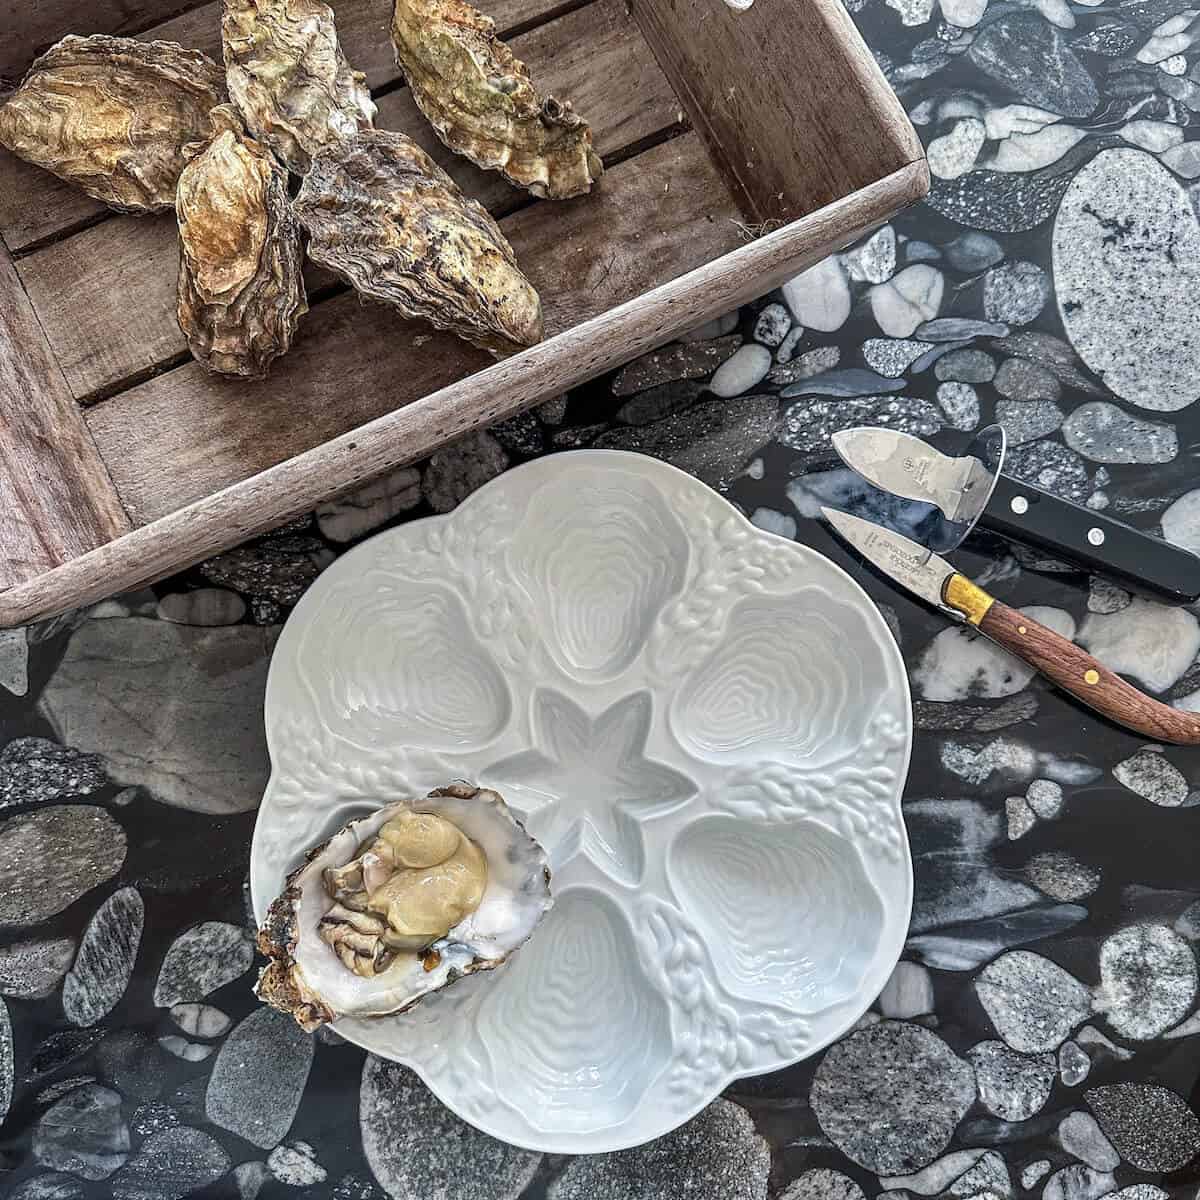 A platter with one shucked oyster on it, next to a crate of fresh oysters. 